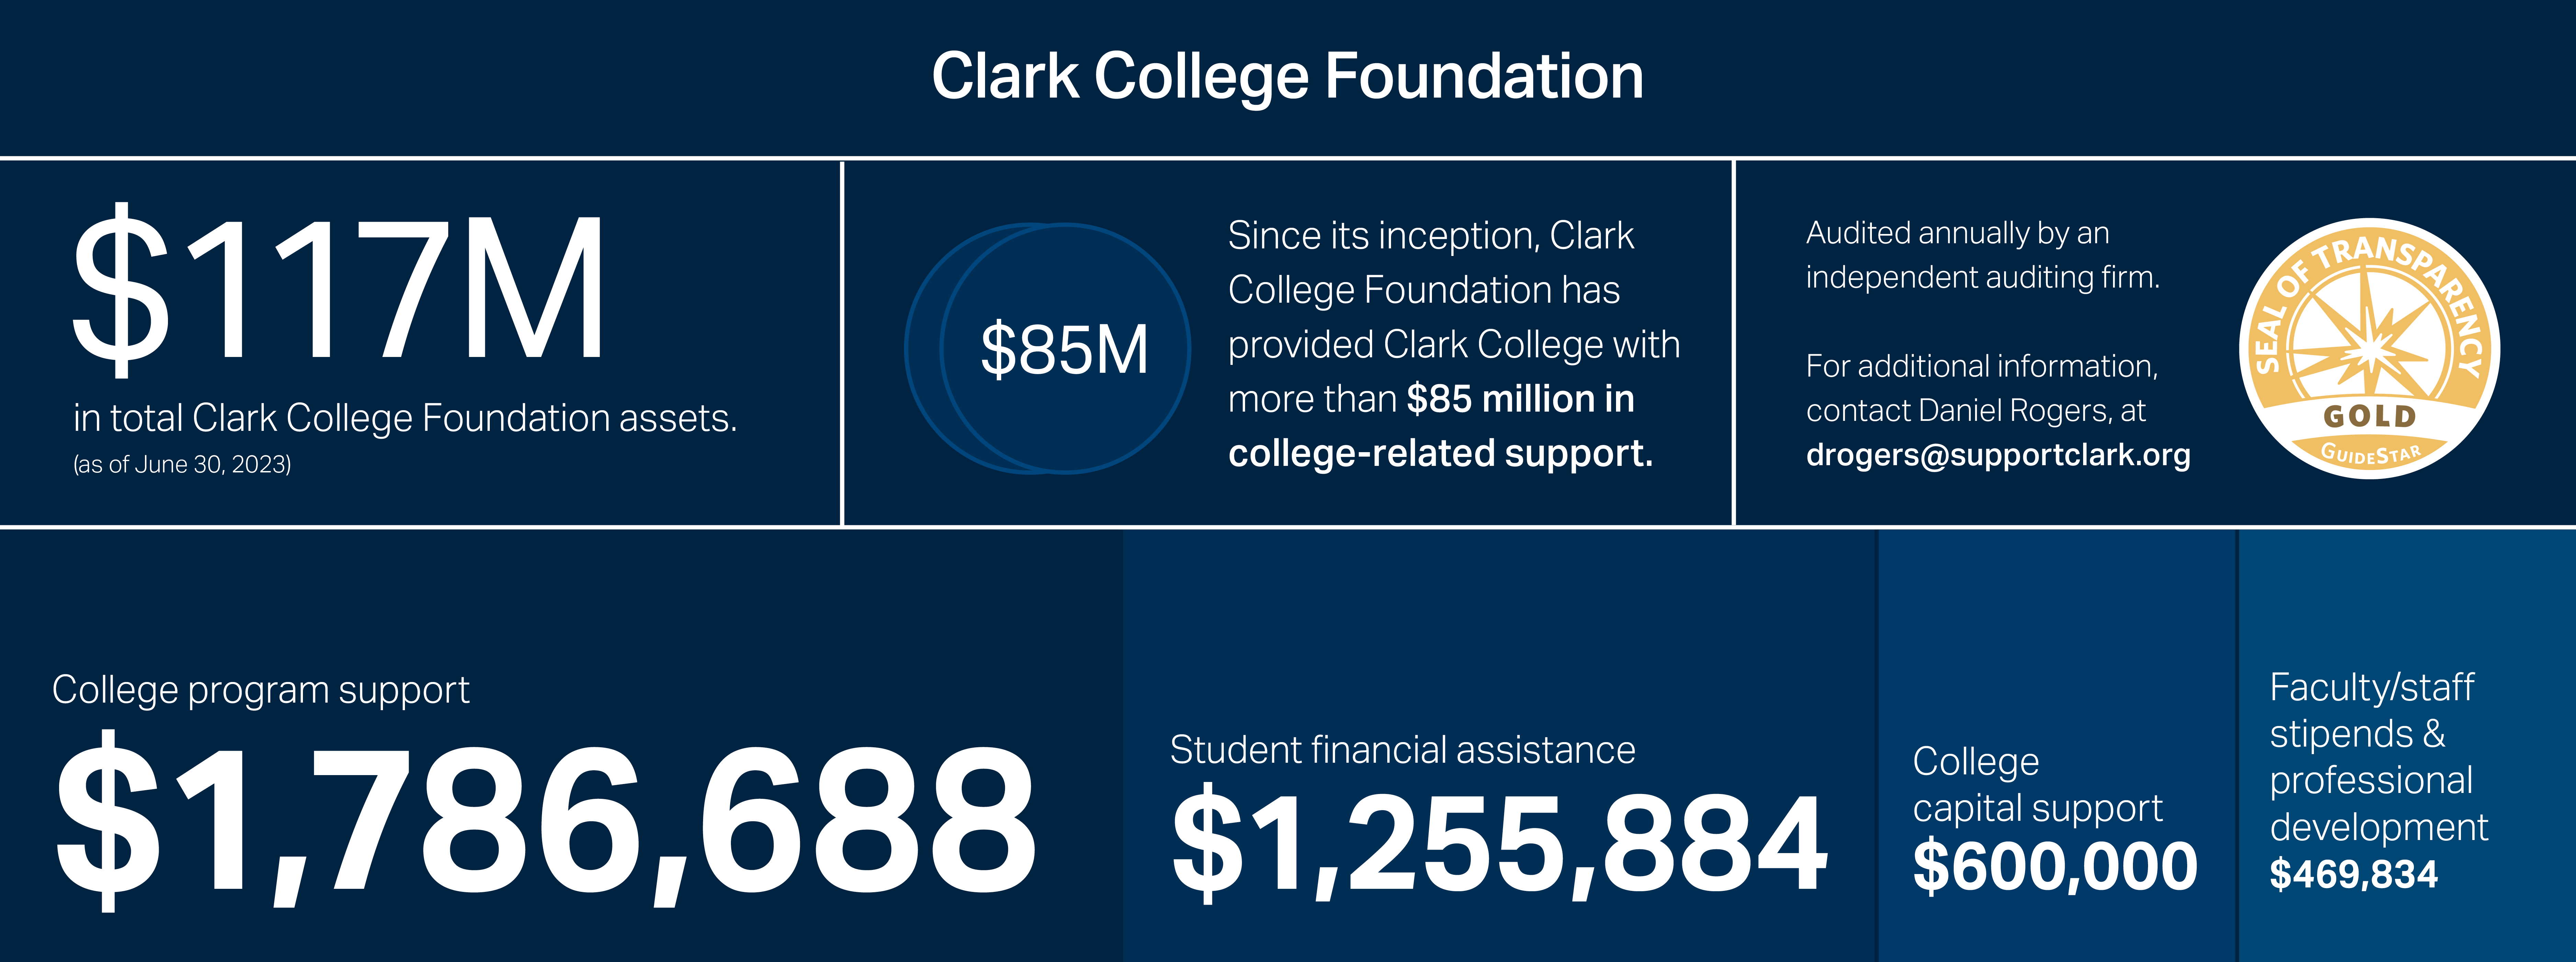 Clark College foundation holds $117 million in assets period since its inception Clark College foundation has provided Clark College with more than 85 million in college related support. Audited annually by an independent auditing firm. For additional information contact Daniel Rogers at drogers@supportclark.org. this year. college program support has totaled 1,786,688 dollars. Student financial assistance has totaled $1,255,884. College capital support $600,000. Faculty and staff stipends and professional development $469,834